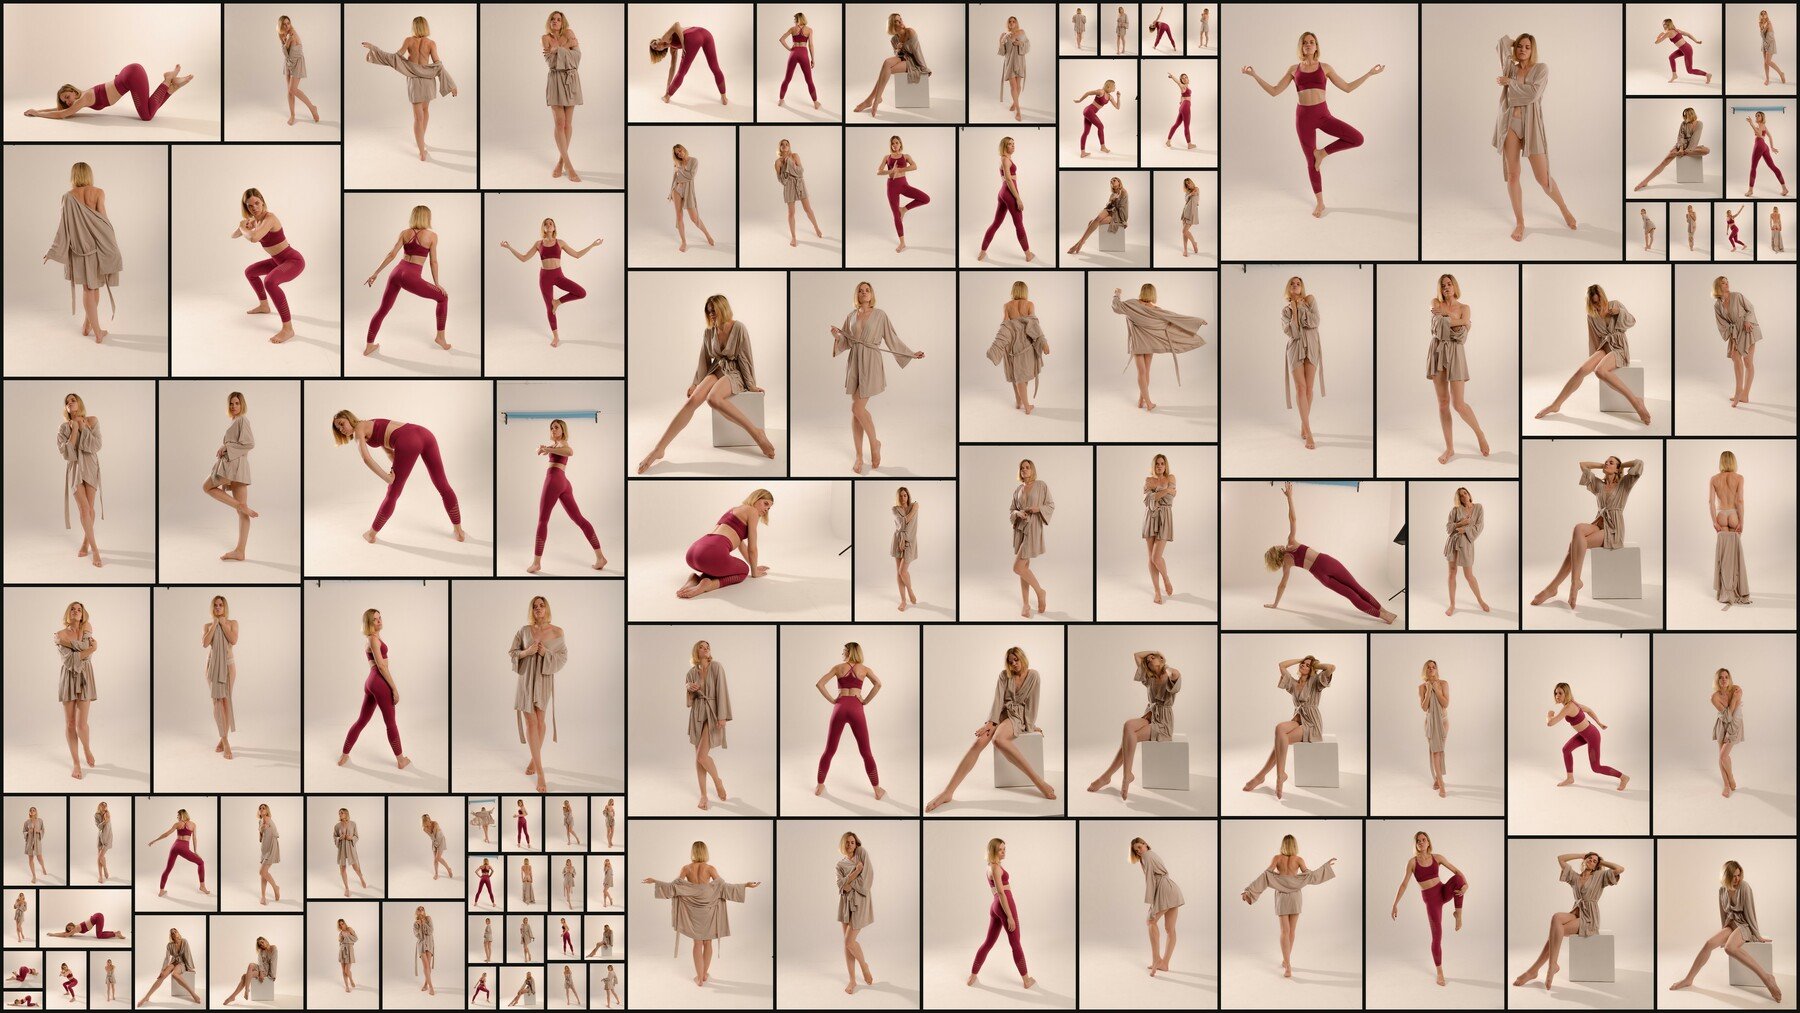 500+ Casual Women Pose References for Artists 2